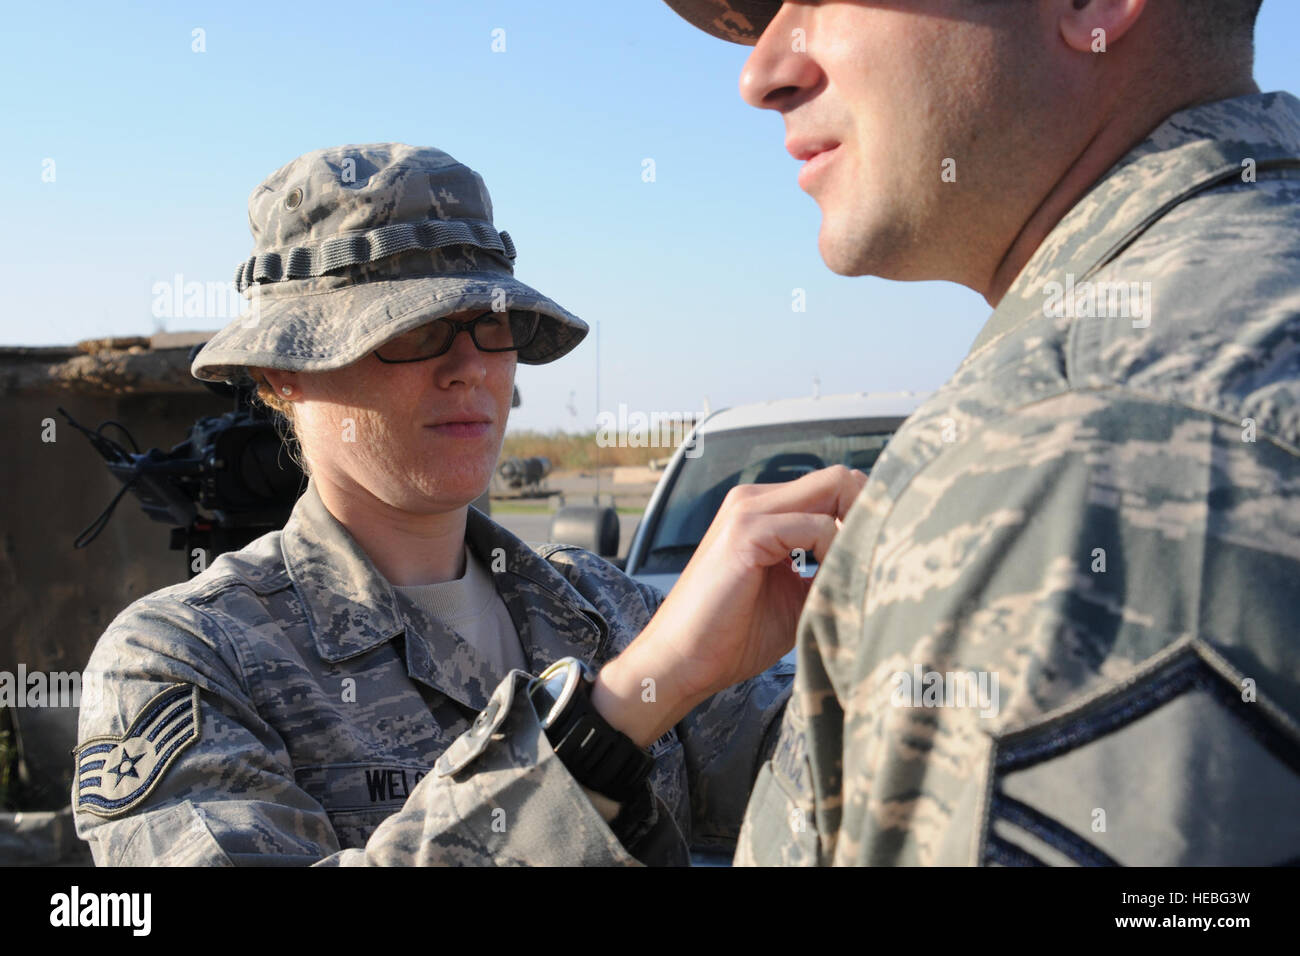 Staff Sgt. Felicia Welch, 506th Air Expeditionary Group Public Affairs broadcaster, attaches a microphone to an interviewee Nov. 23. Welch was recently recognized as the 506th Air Expeditionary Group's Warrior of the Week. A native of Sarasota, Fla., Sergeant Welch is deployed from the 48th Fighter Wing Public Affairs, Royal Air Force Lakenheath, United Kingdom. Stock Photo